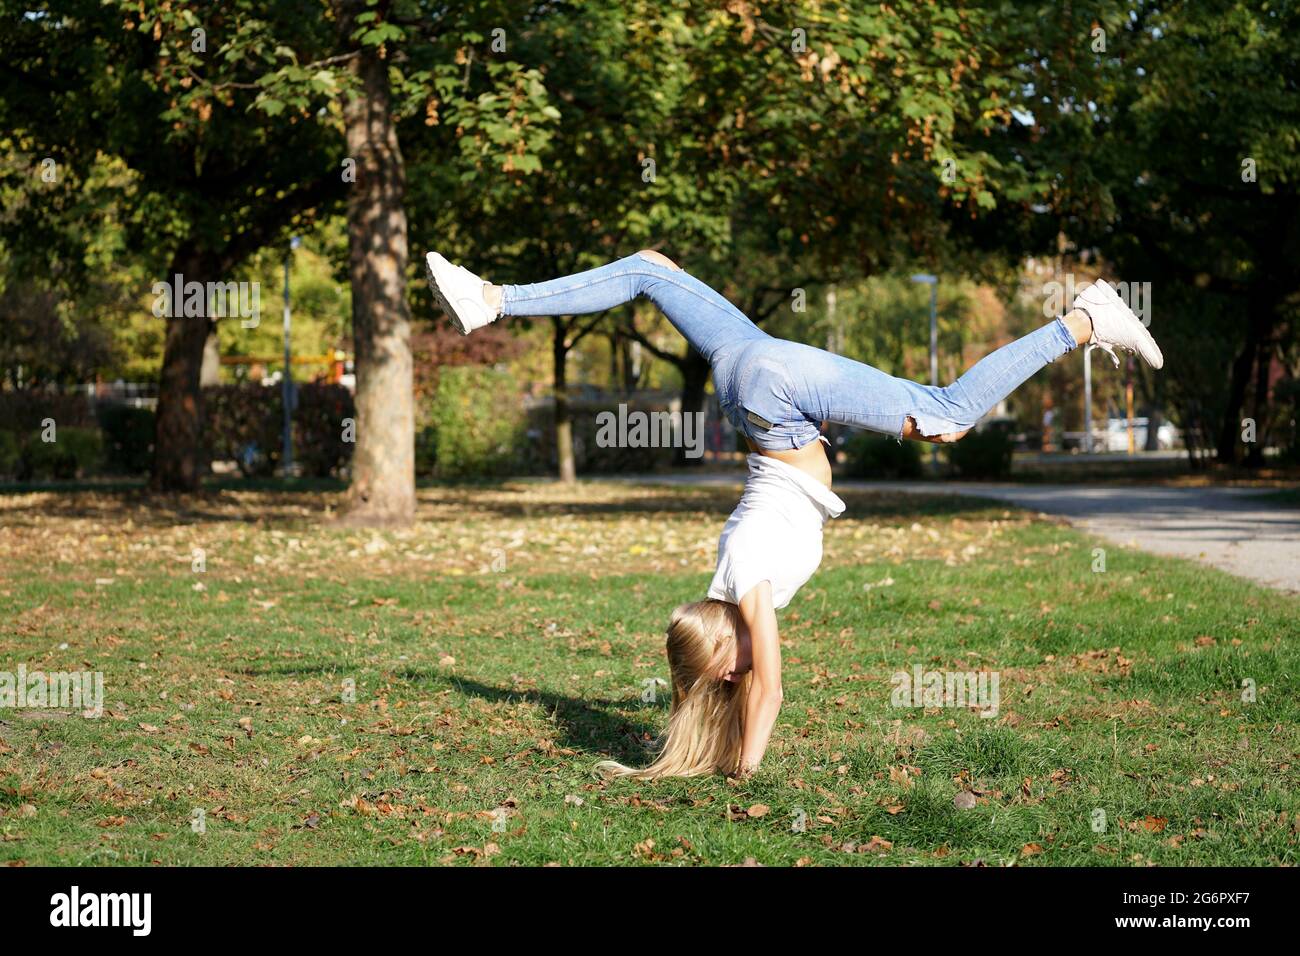 girl praticing handstand in a park Stock Photo